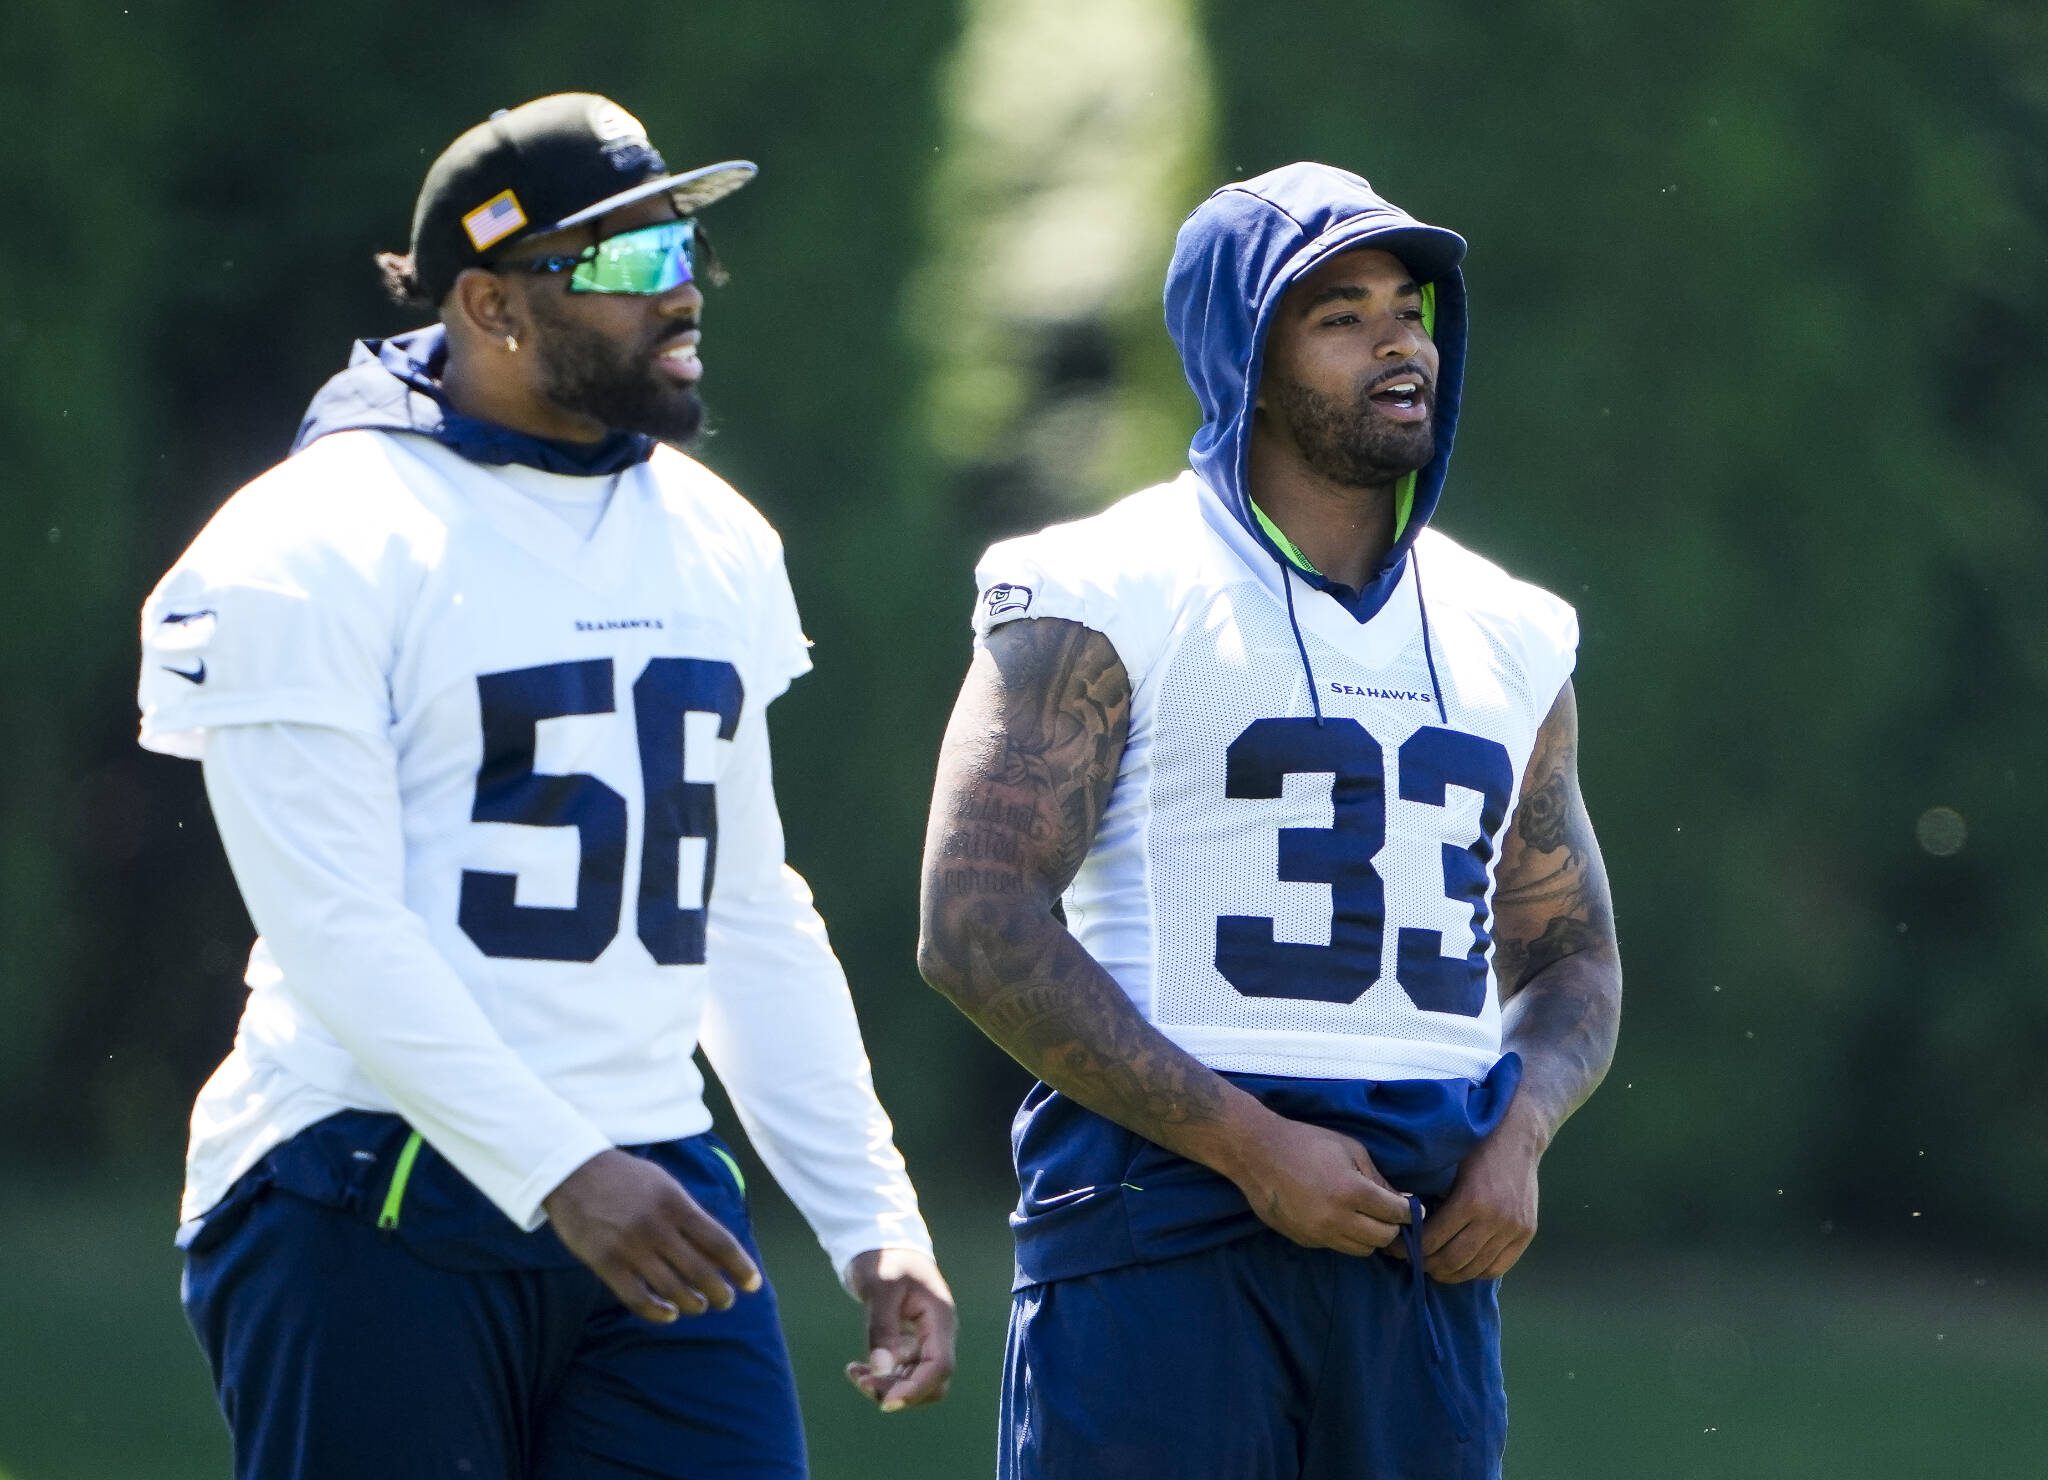 Seahawks linebacker Jordyn Brooks (56) and safety Jamal Adams (33) talk during practice Tuesday at the team’s facilities in Renton. (AP Photo/Lindsey Wasson)